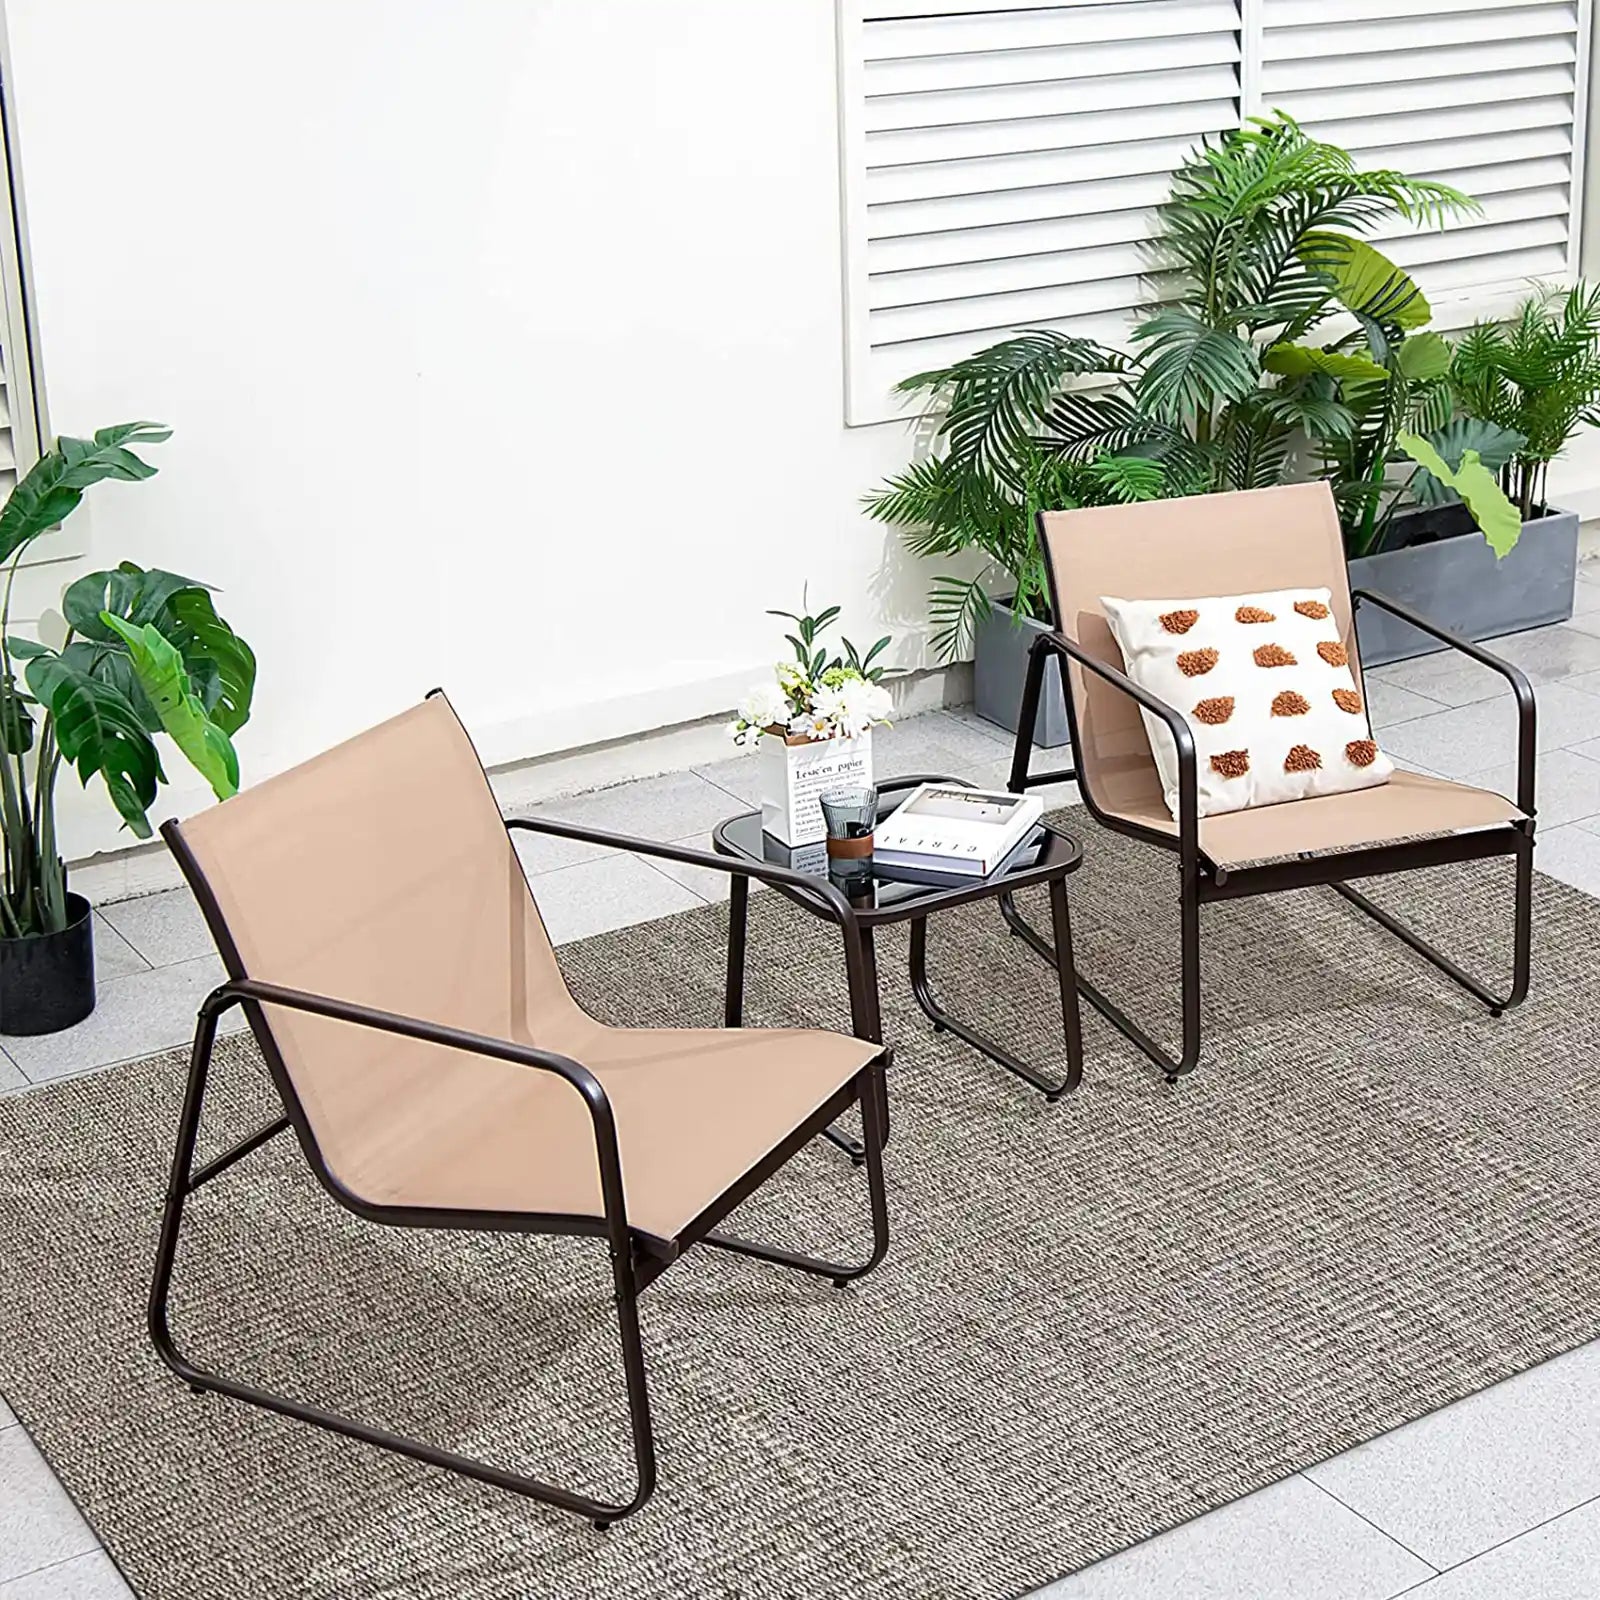 3 Pieces Patio Conversation Set, Outdoor Metal Chair & Table Set, Breathable Fabric & Tempered Glass Tabletop, Metal Frame Furniture Set for Backyard